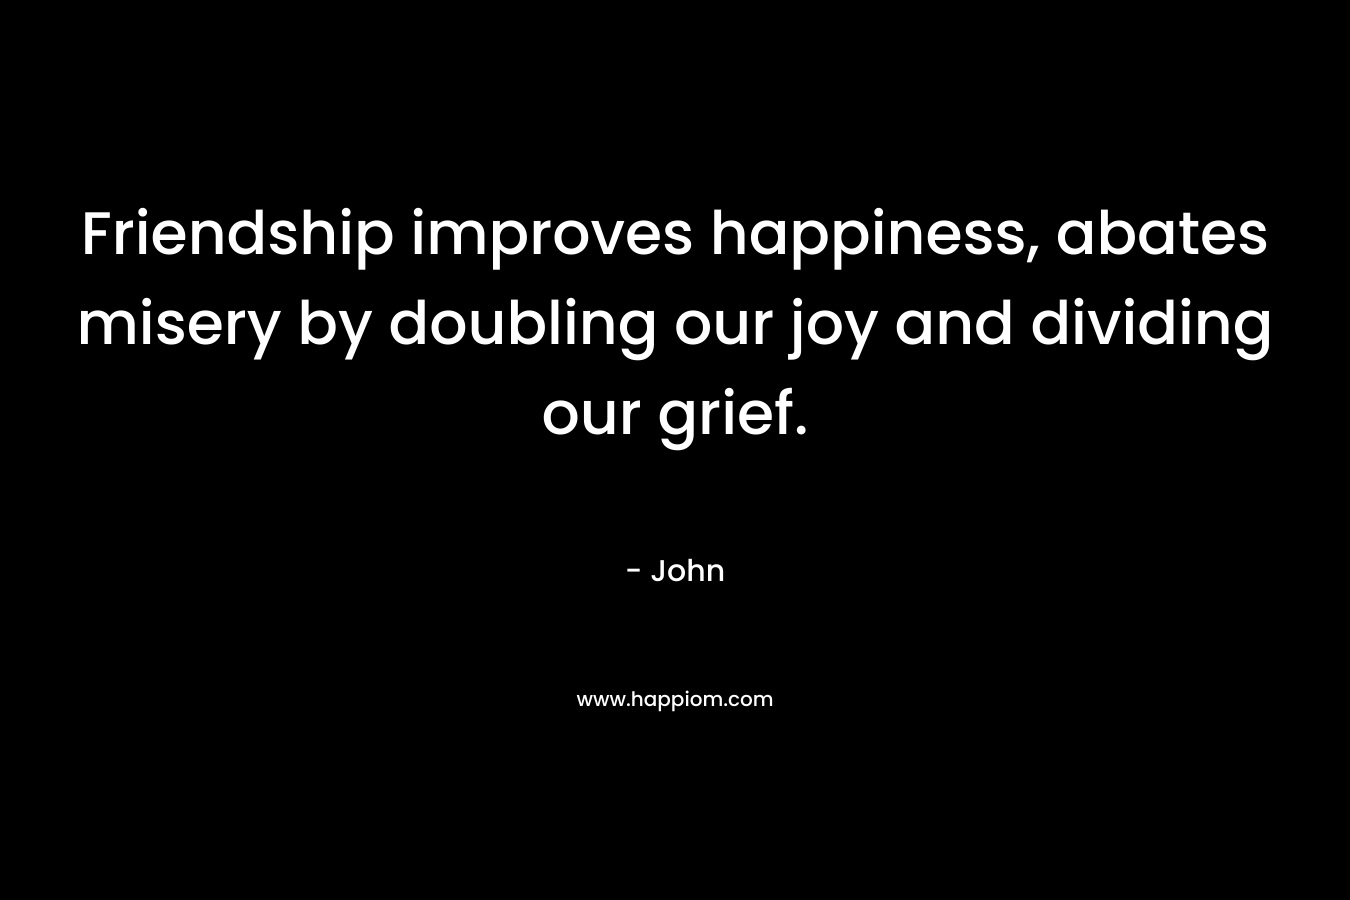 Friendship improves happiness, abates misery by doubling our joy and dividing our grief.